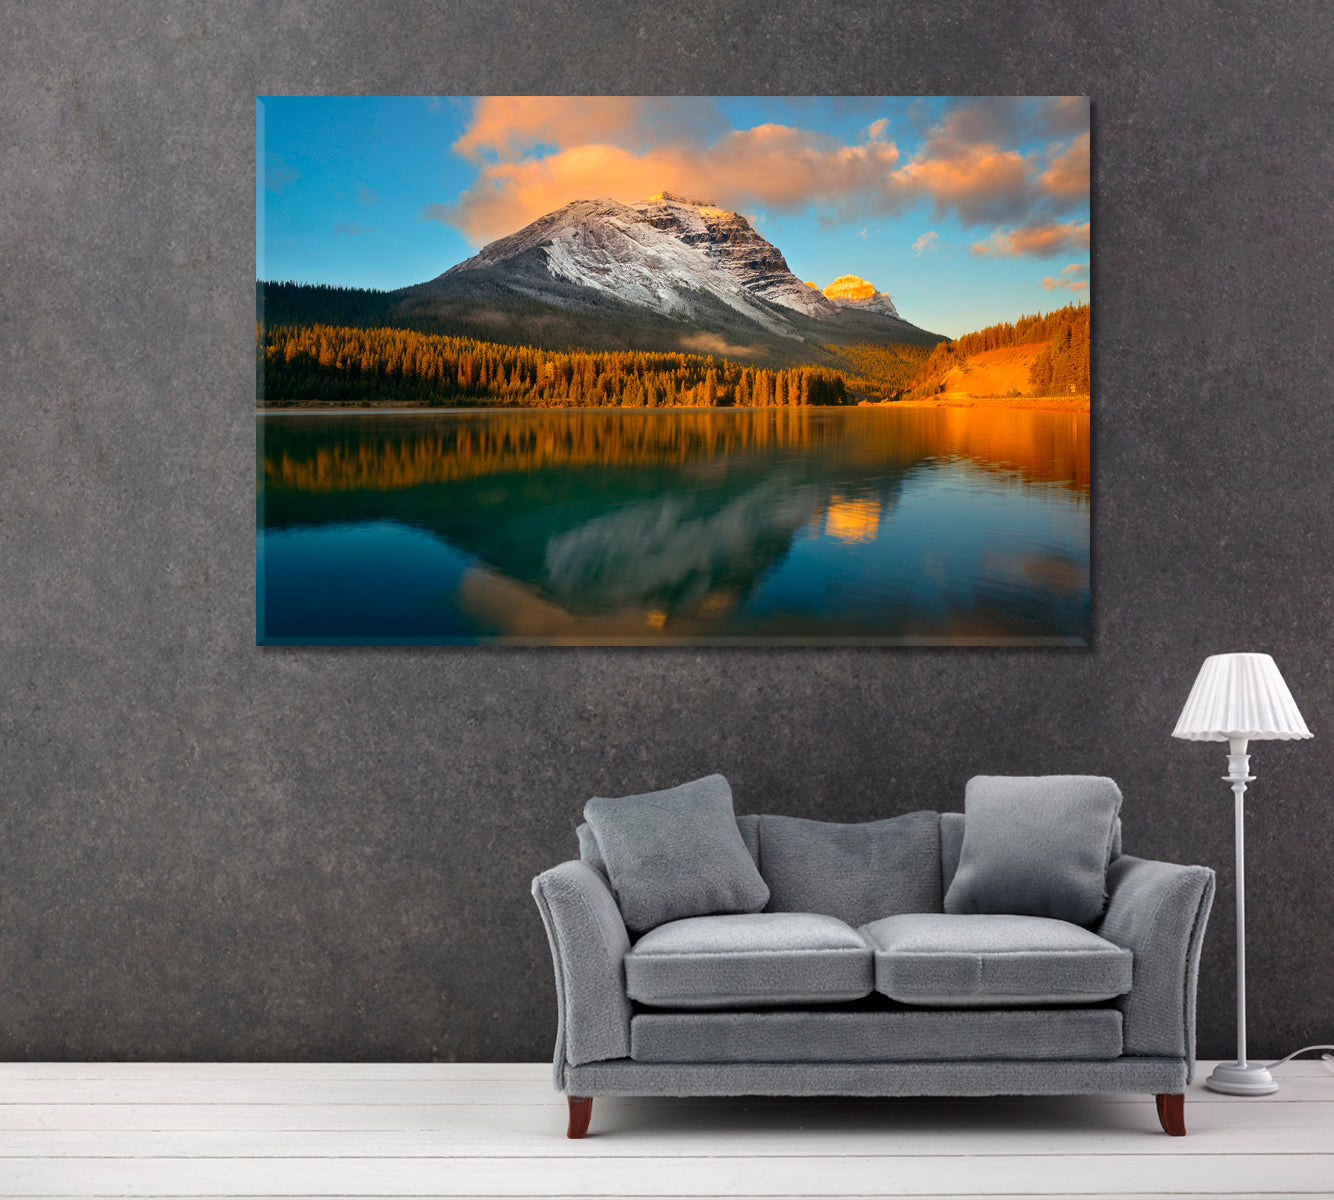 Mountain Lake in Banff National Park Canvas Print ArtLexy 1 Panel 24"x16" inches 